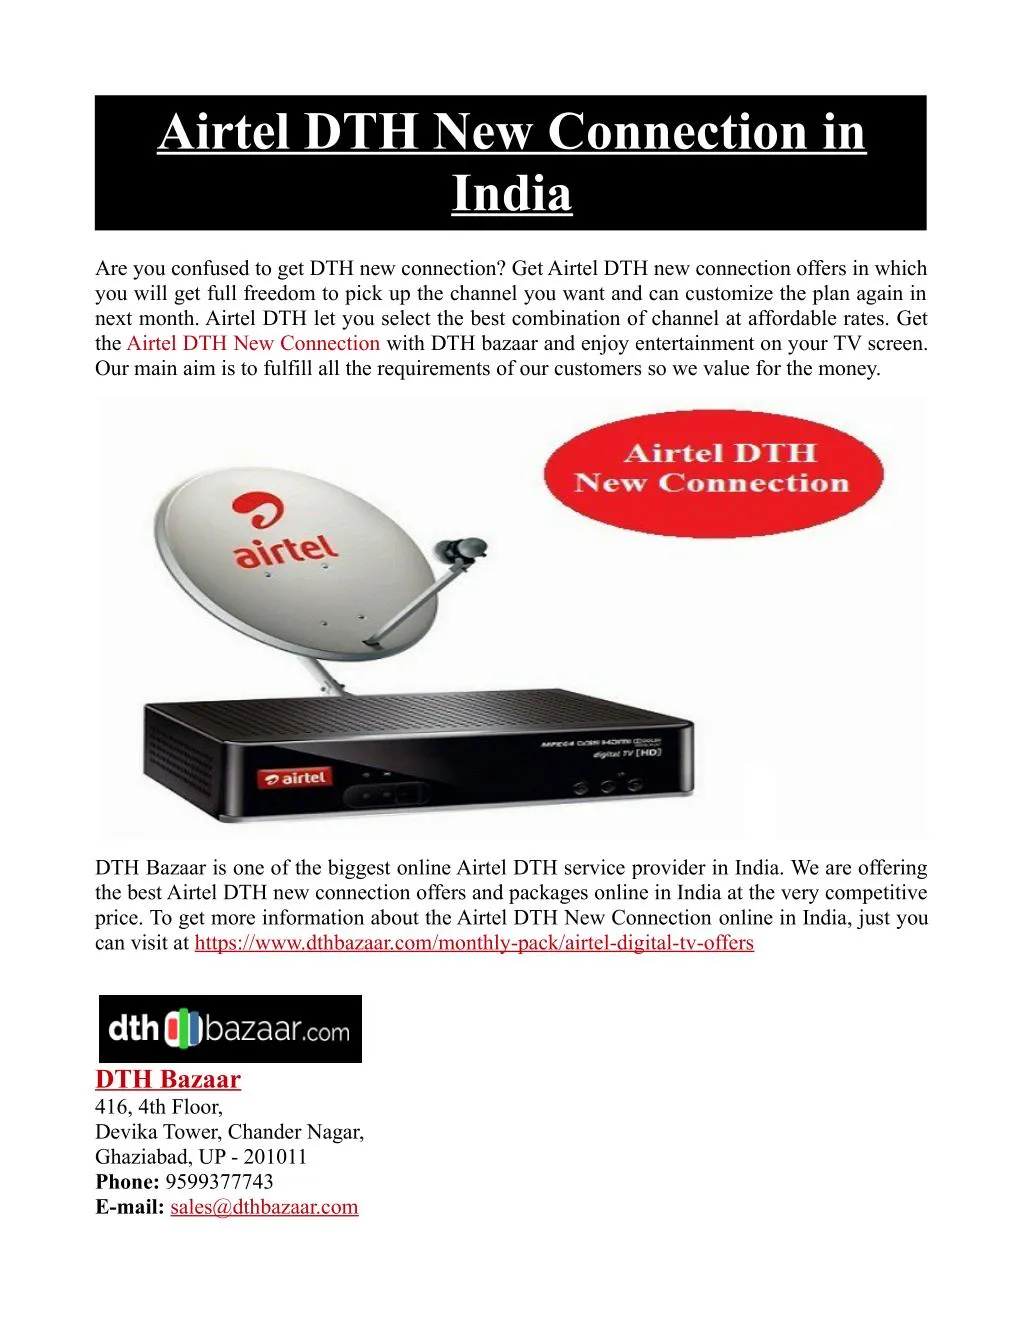 airtel dth new connection in india